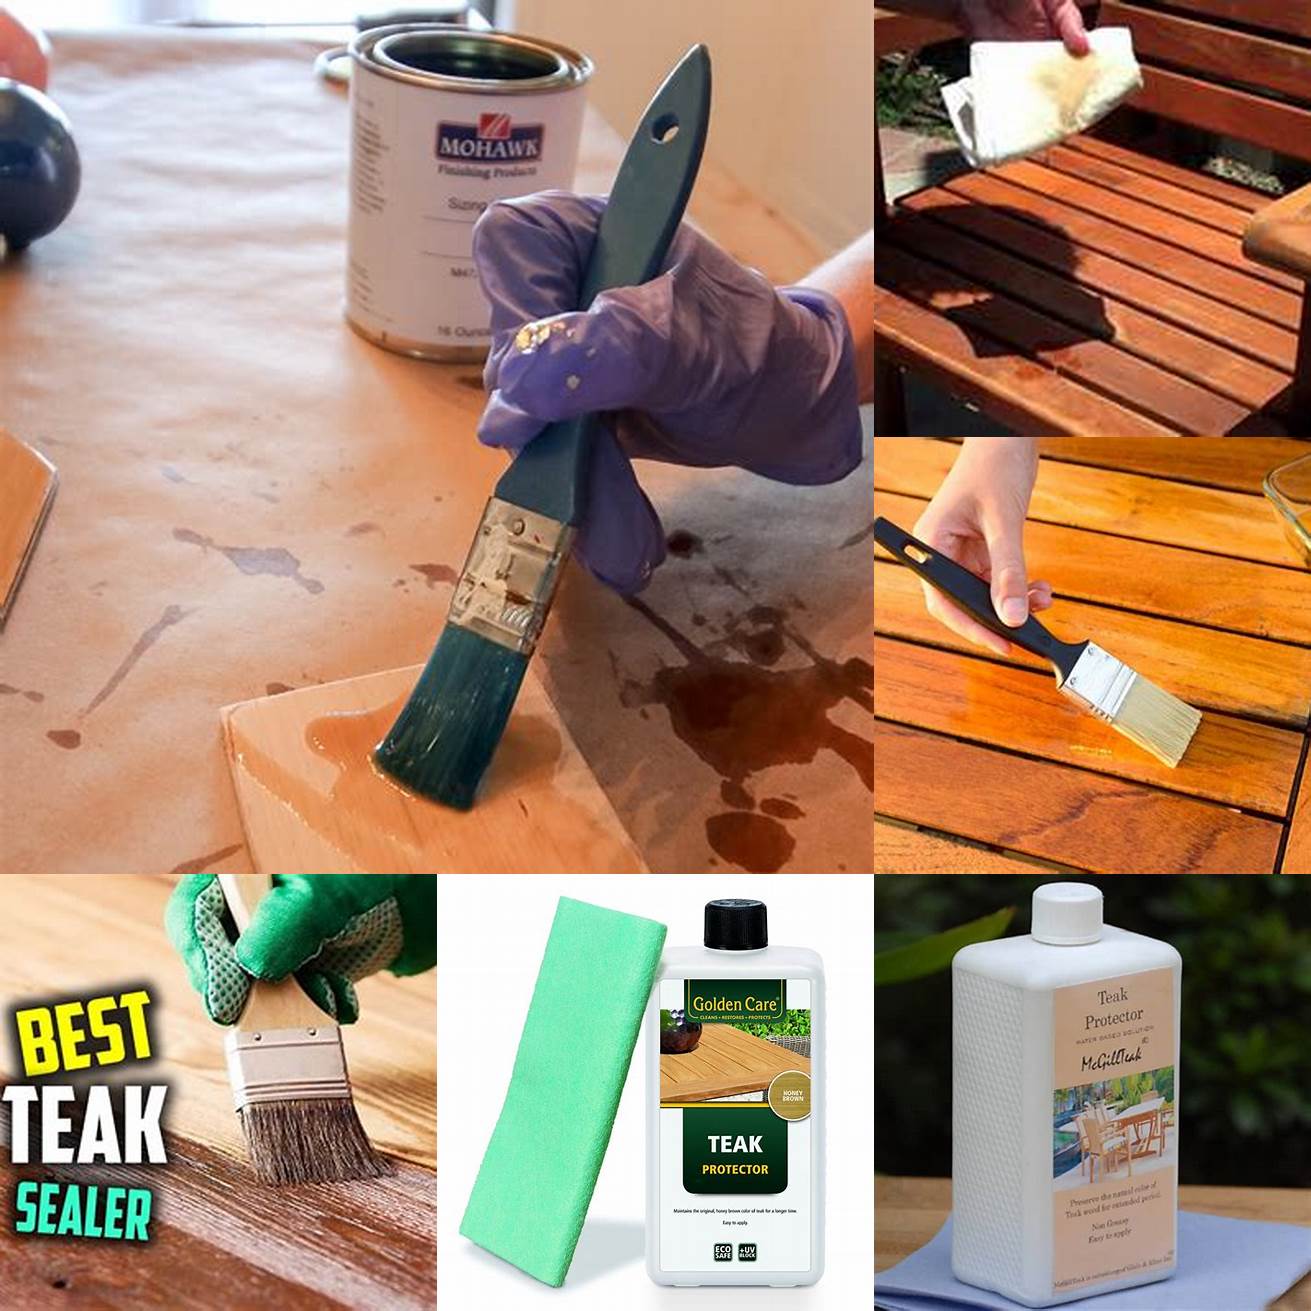 Apply a teak sealer for extra protection